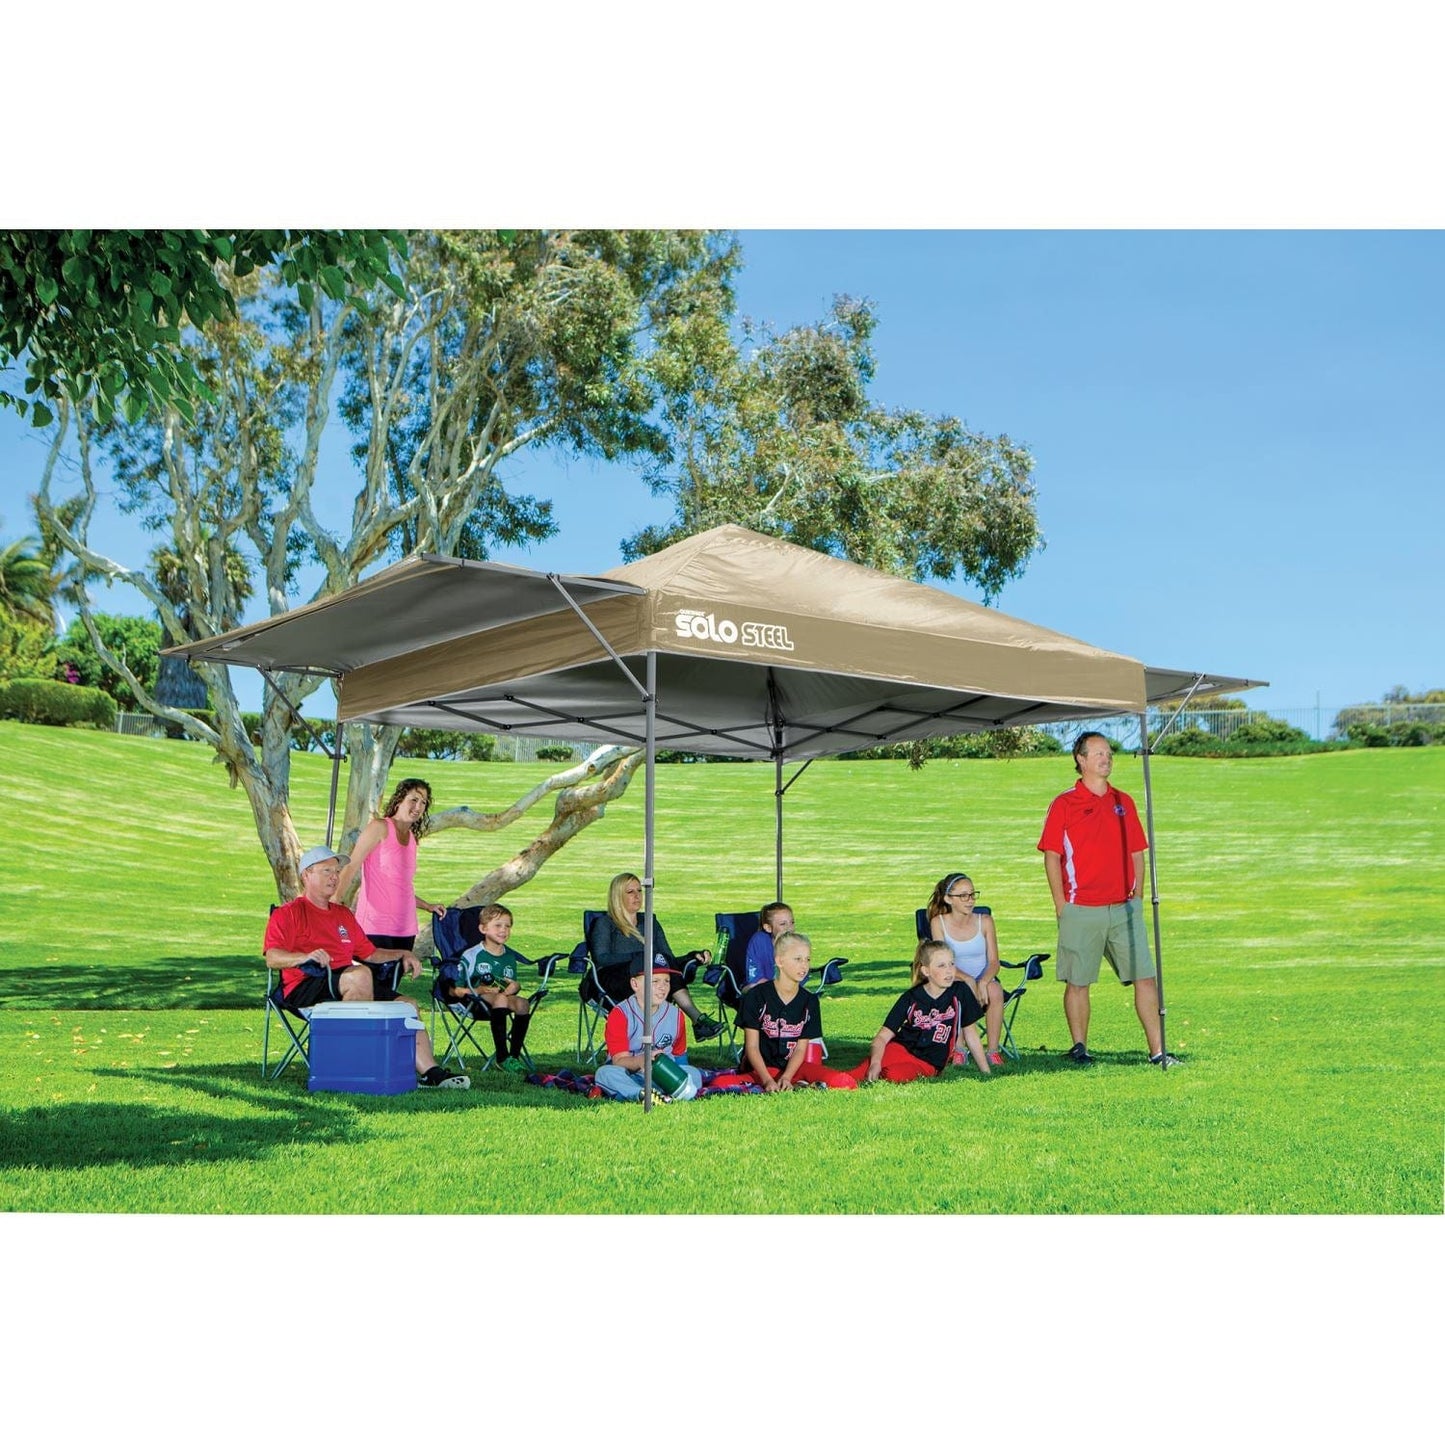 The Fulfiller Pop Up Canopies Quik Shade | Solo Steel 170 10' x 17' Straight Leg Canopy - Khaki 167544DS